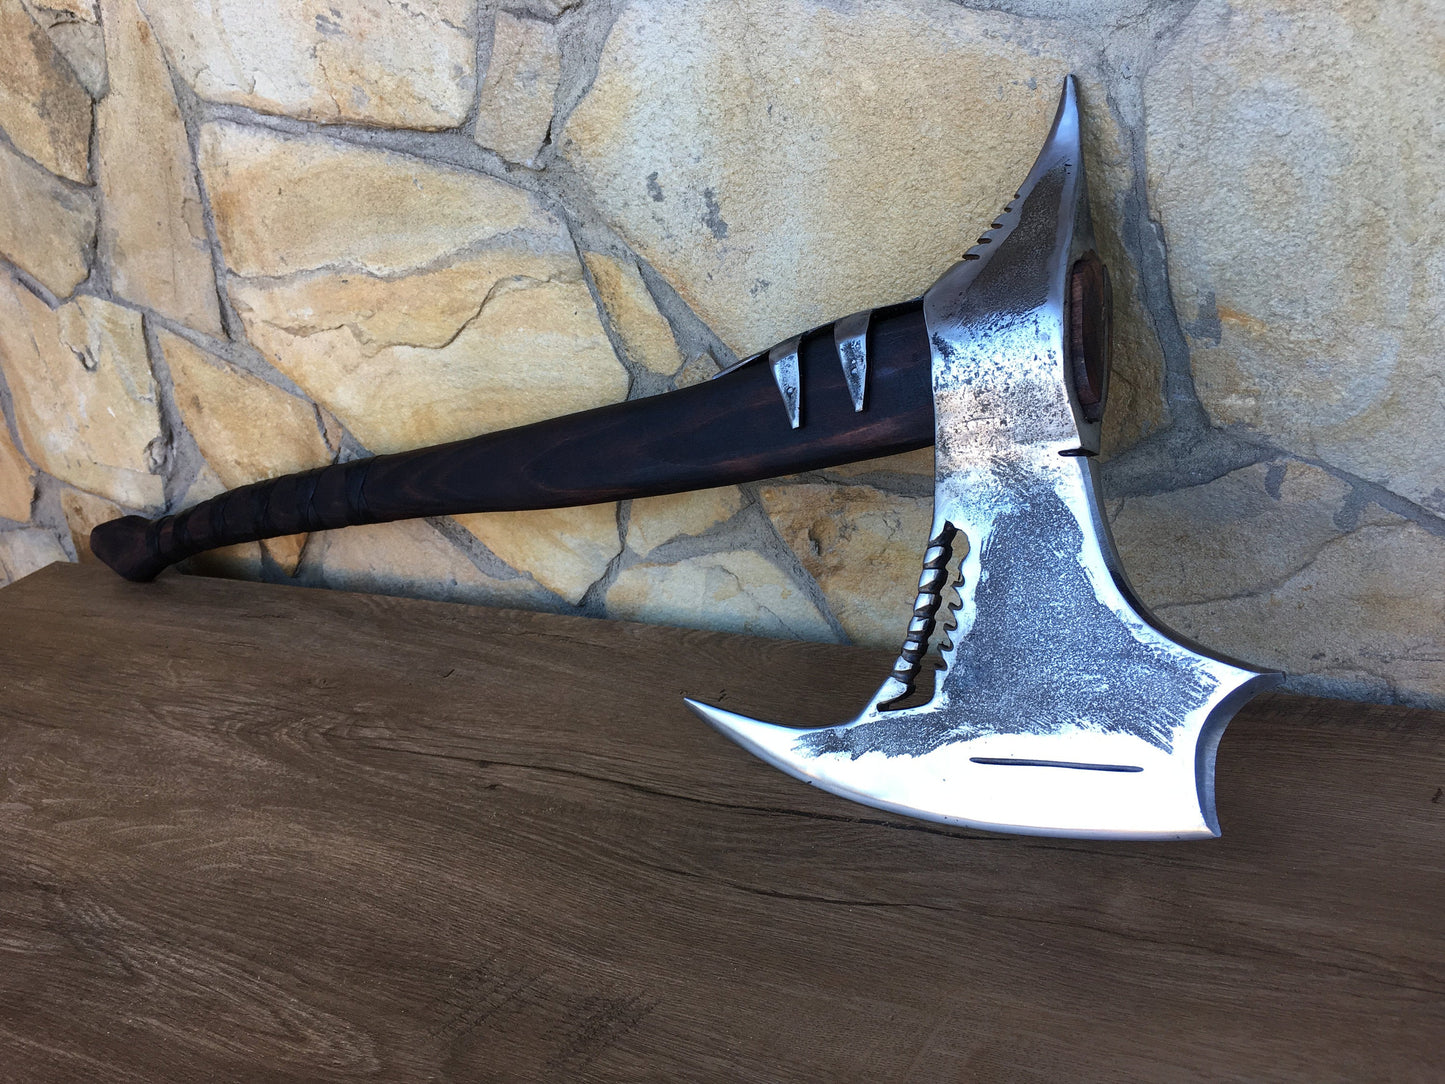 Viking axe, tomahawk, hatchet, axe, mens gift, iron gift, medieval axe, iron anniversary, viking camp, mens gifts, viking gifts, manly gift